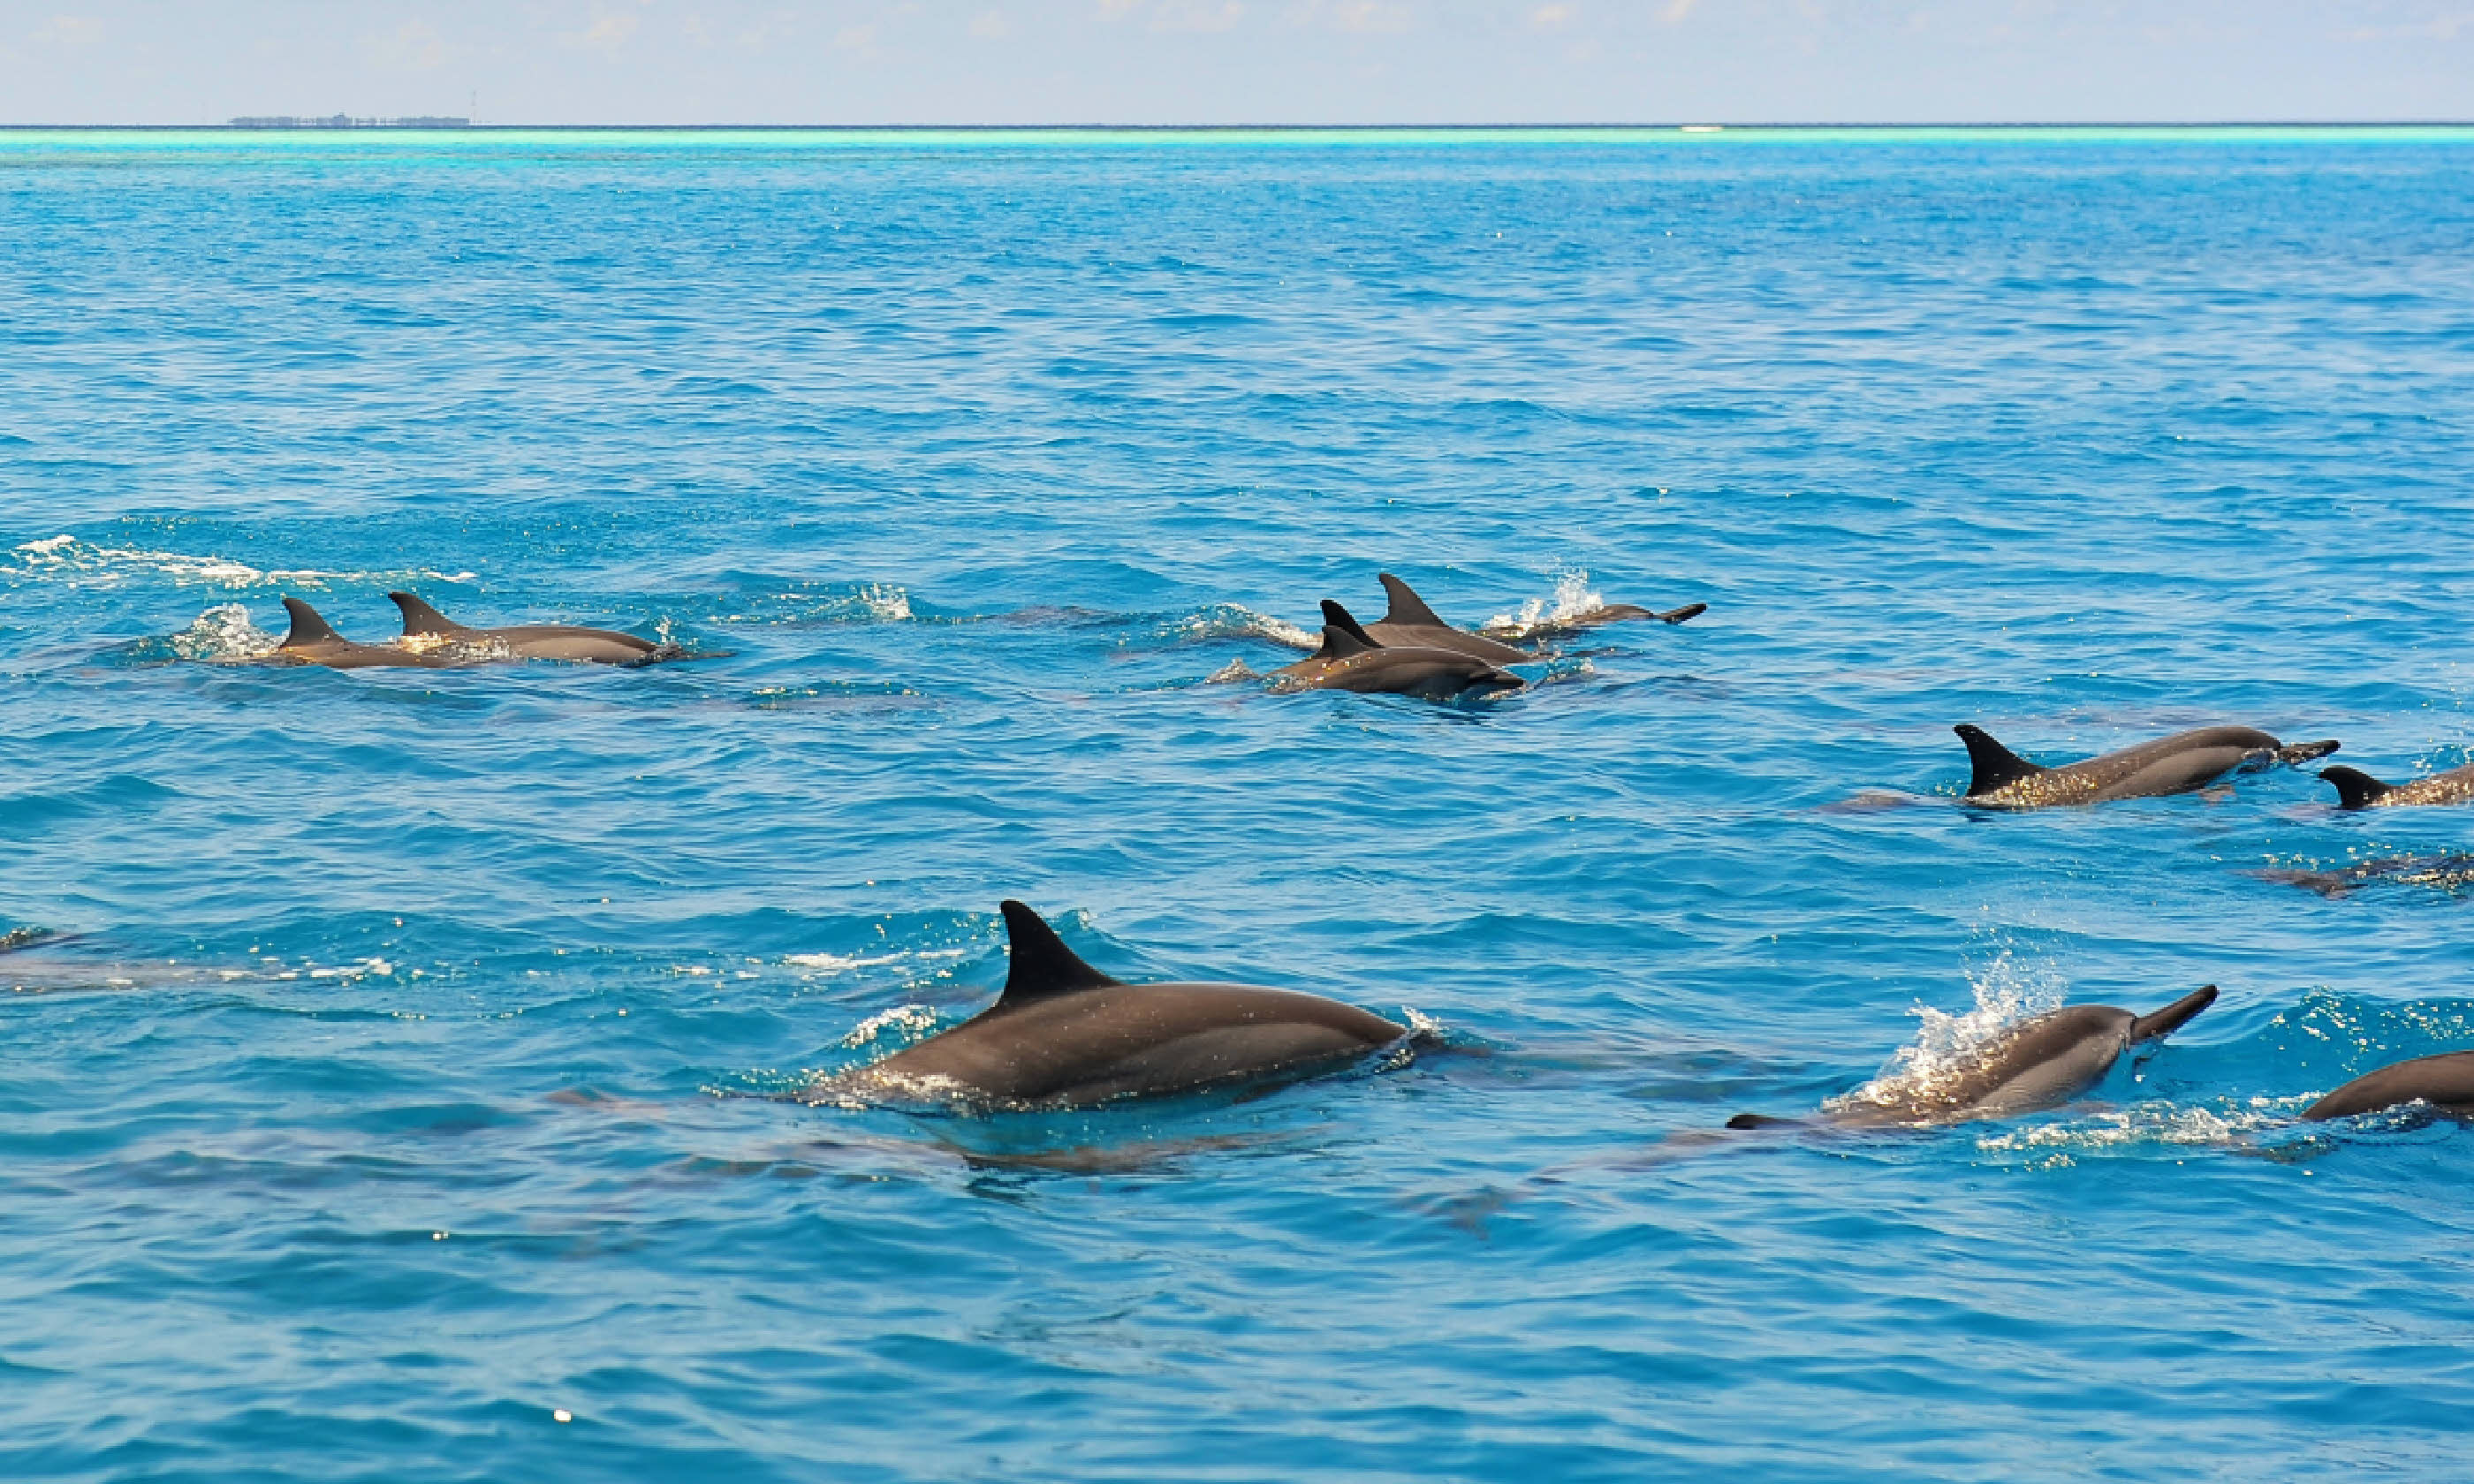 Wild dolphins in the Maldives (Shutterstock)